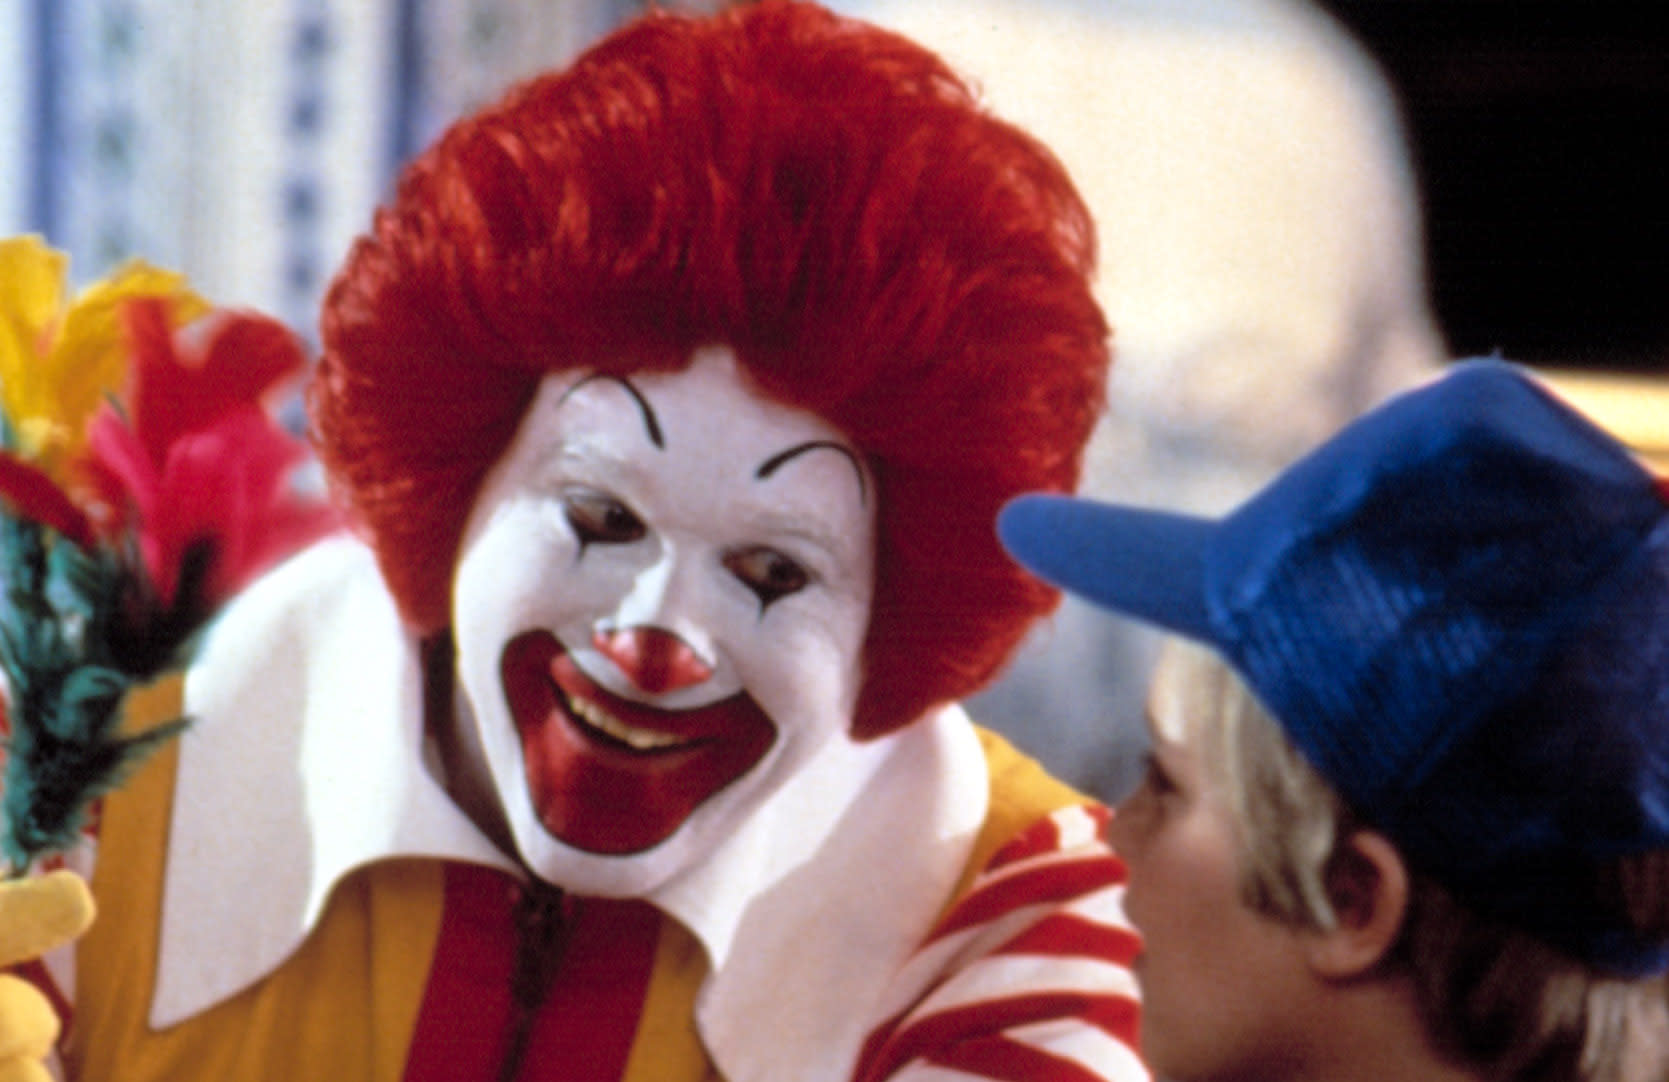 ronald-mcdonald-revisits-his-notorious-movie-debut-30-years-later